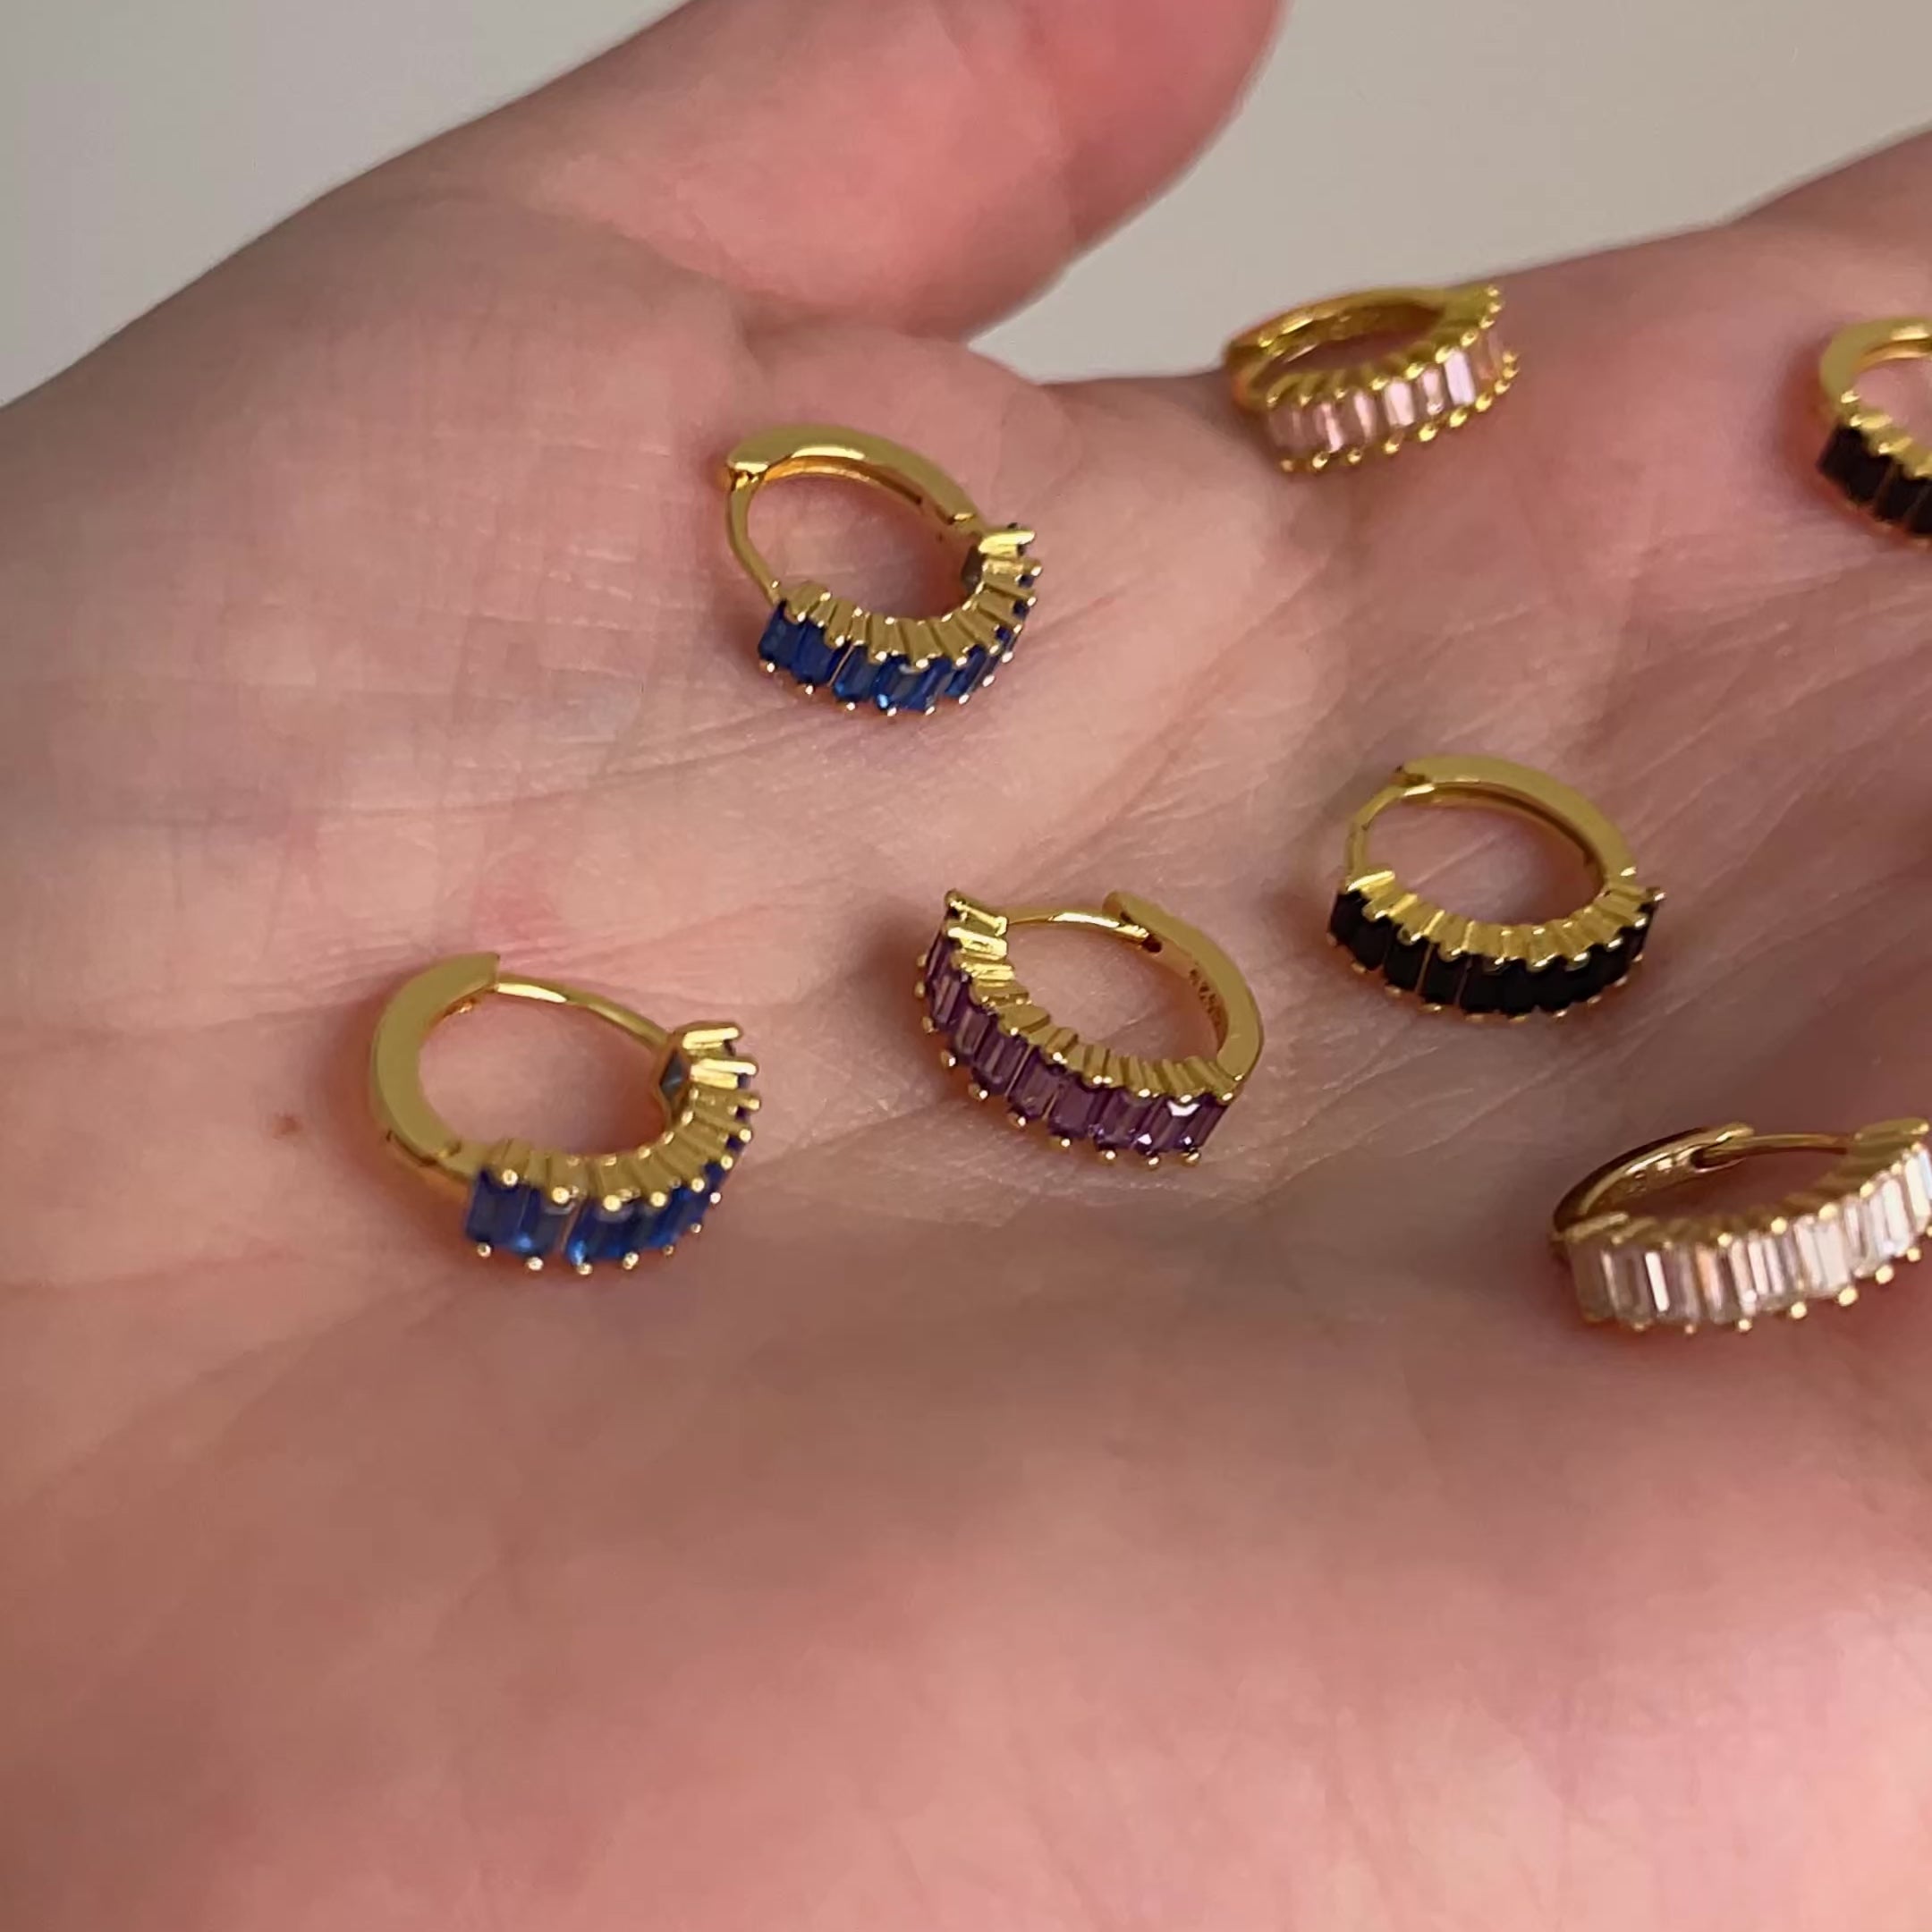 Double Gold Hoops